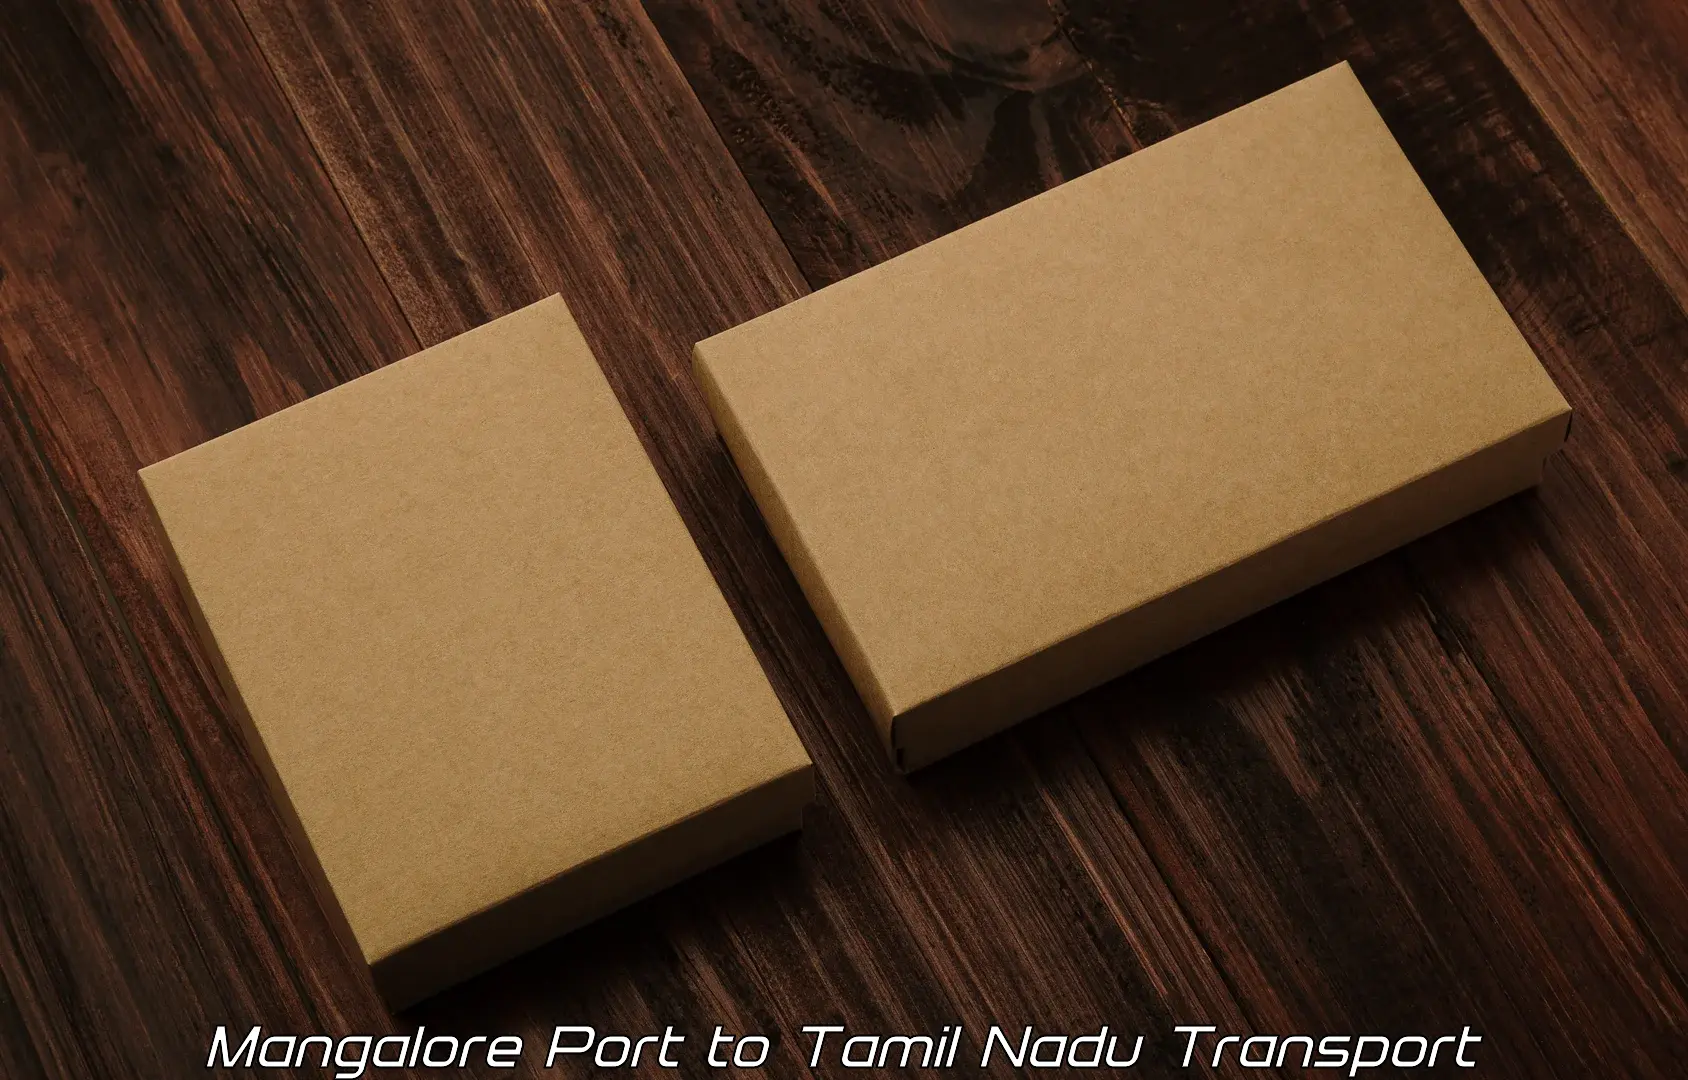 Road transport online services Mangalore Port to Turaiyur